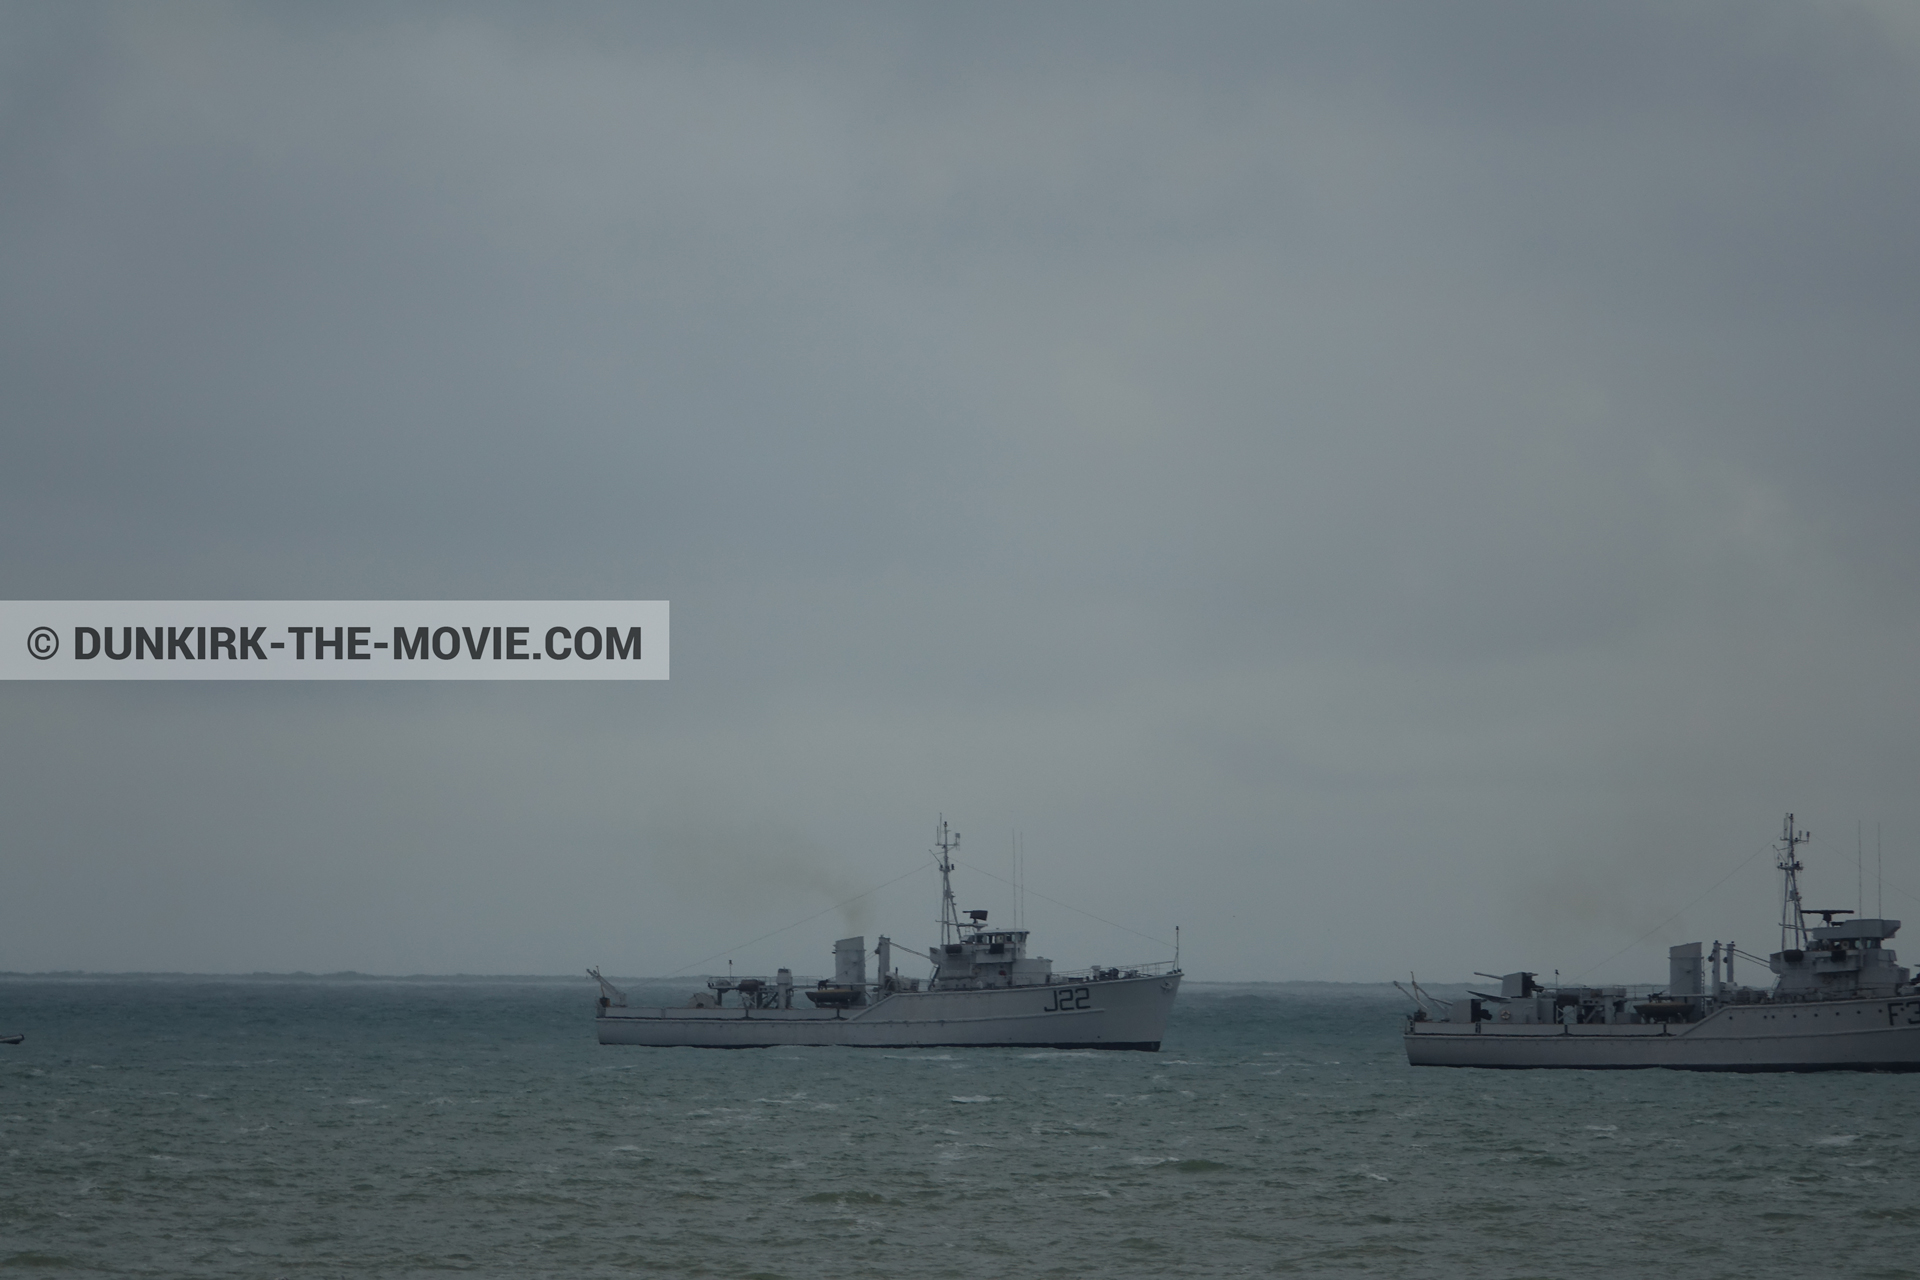 Picture with grey sky, F34 - Hr.Ms. Sittard, J22 -Hr.Ms. Naaldwijk, calm sea,  from behind the scene of the Dunkirk movie by Nolan